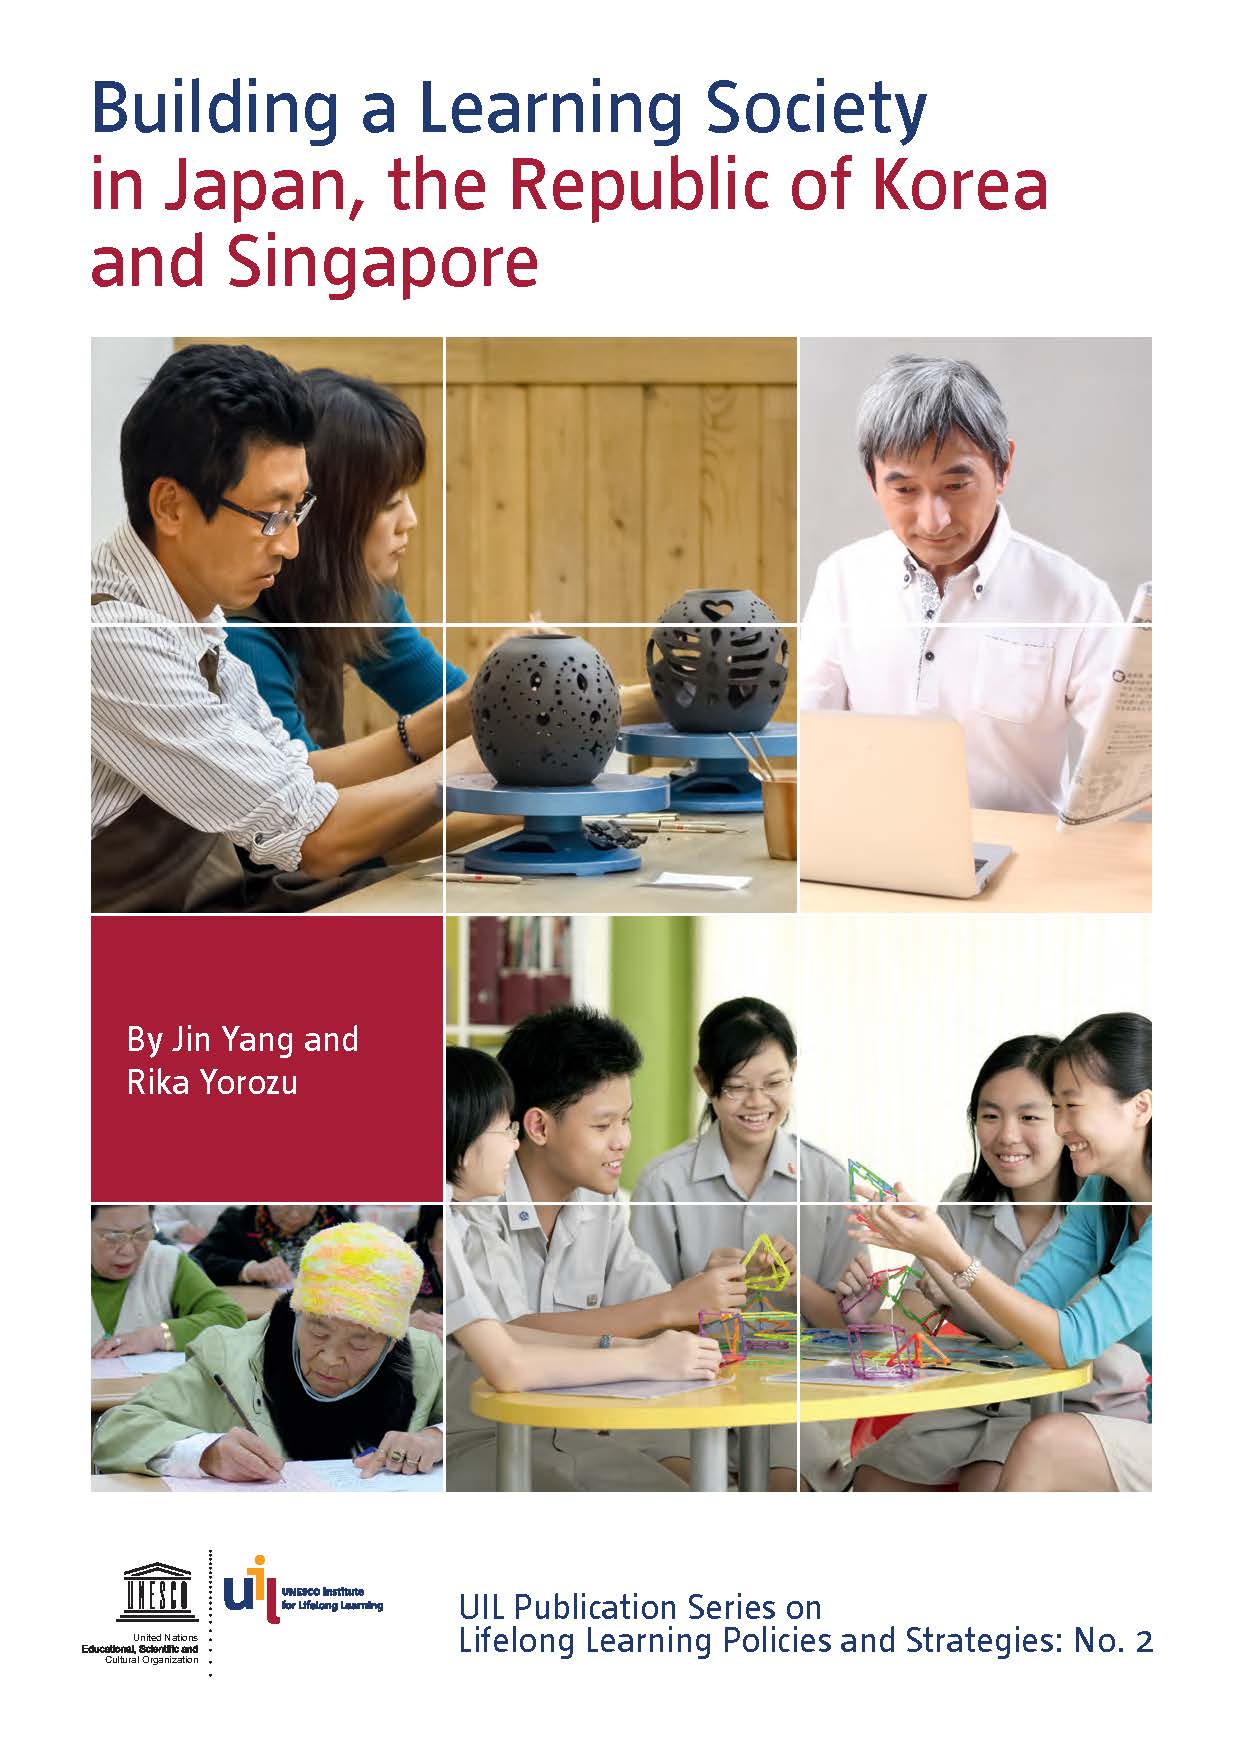 Building a Learning Society in Japan, the Republic of Korea and Singapore